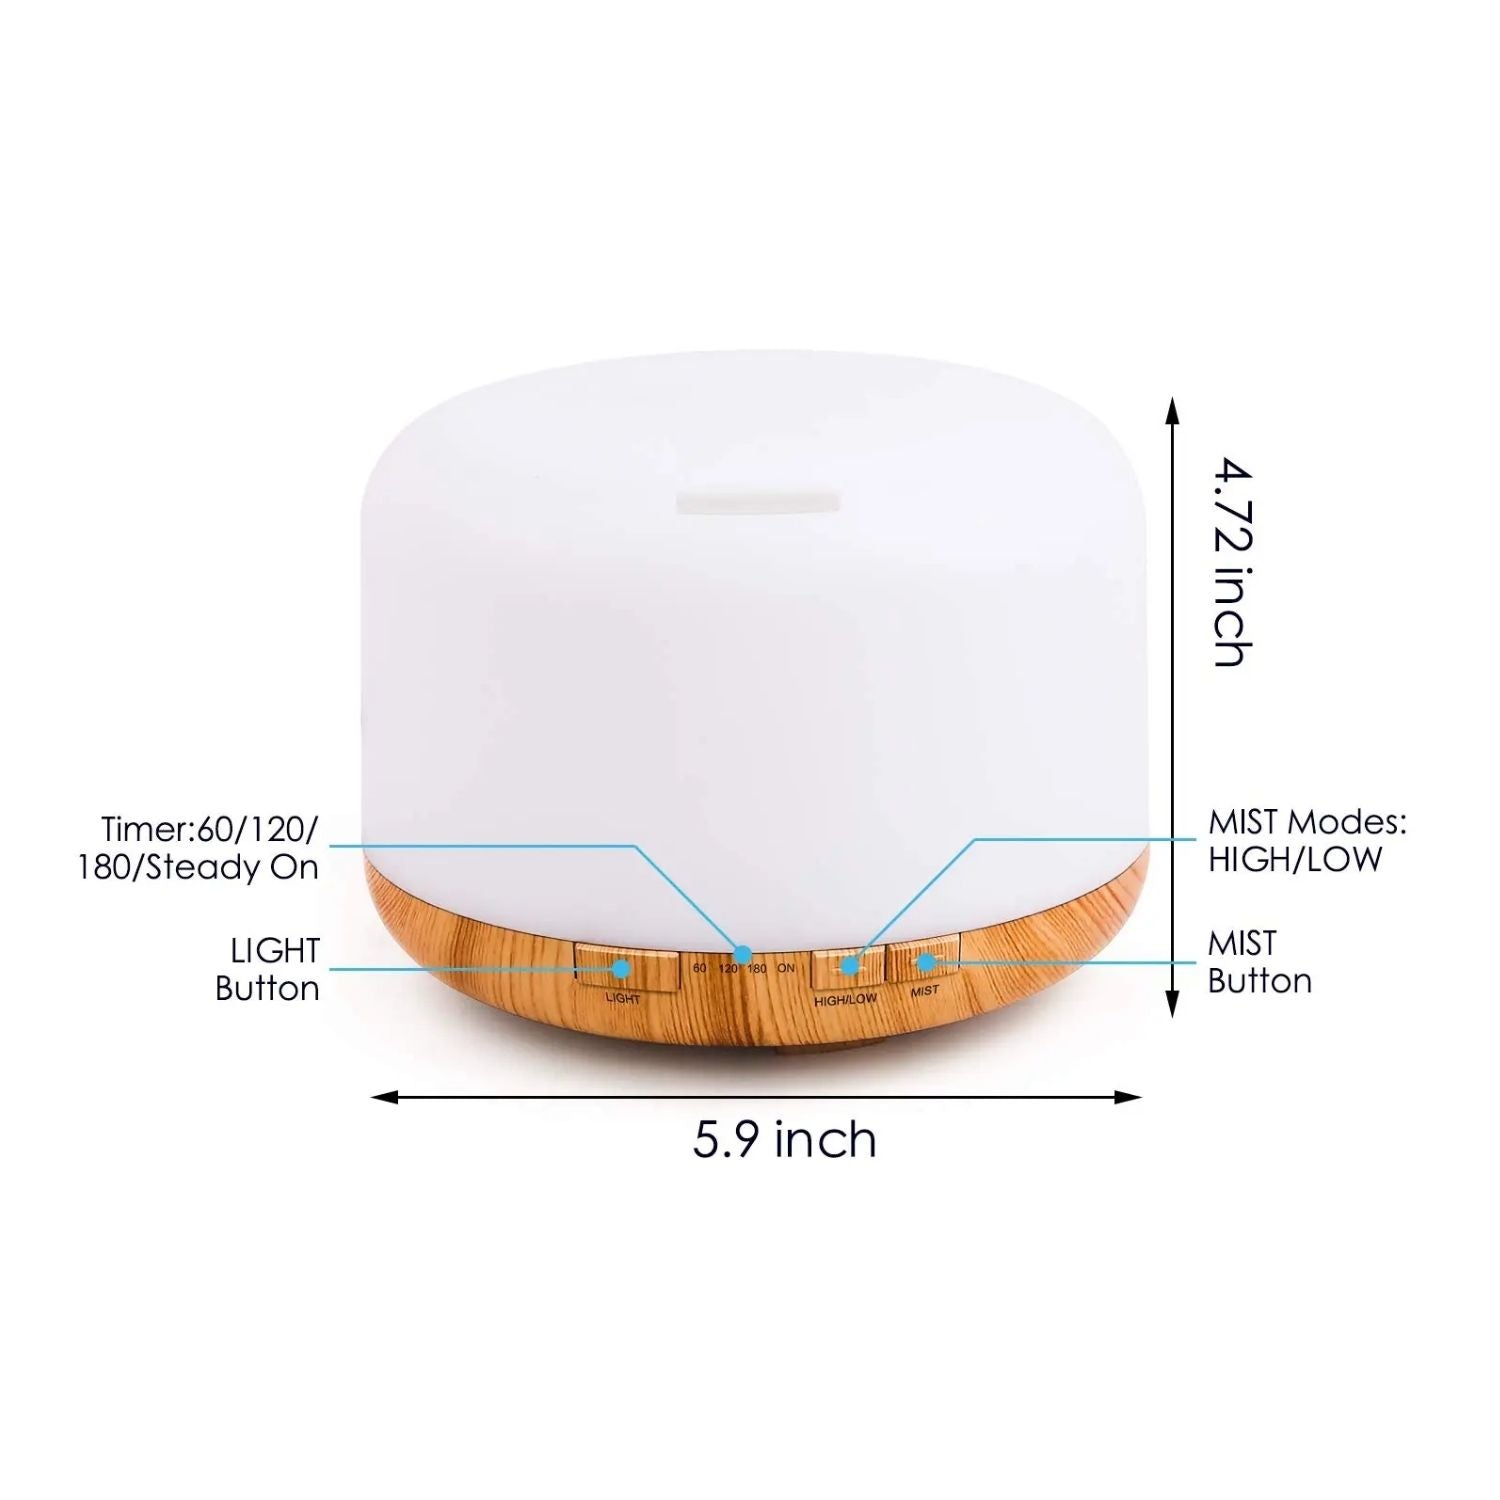 GOMINIMO 5 in1 LED Aromatherapy Essential Oil Diffuser 500ml (Wood Base)